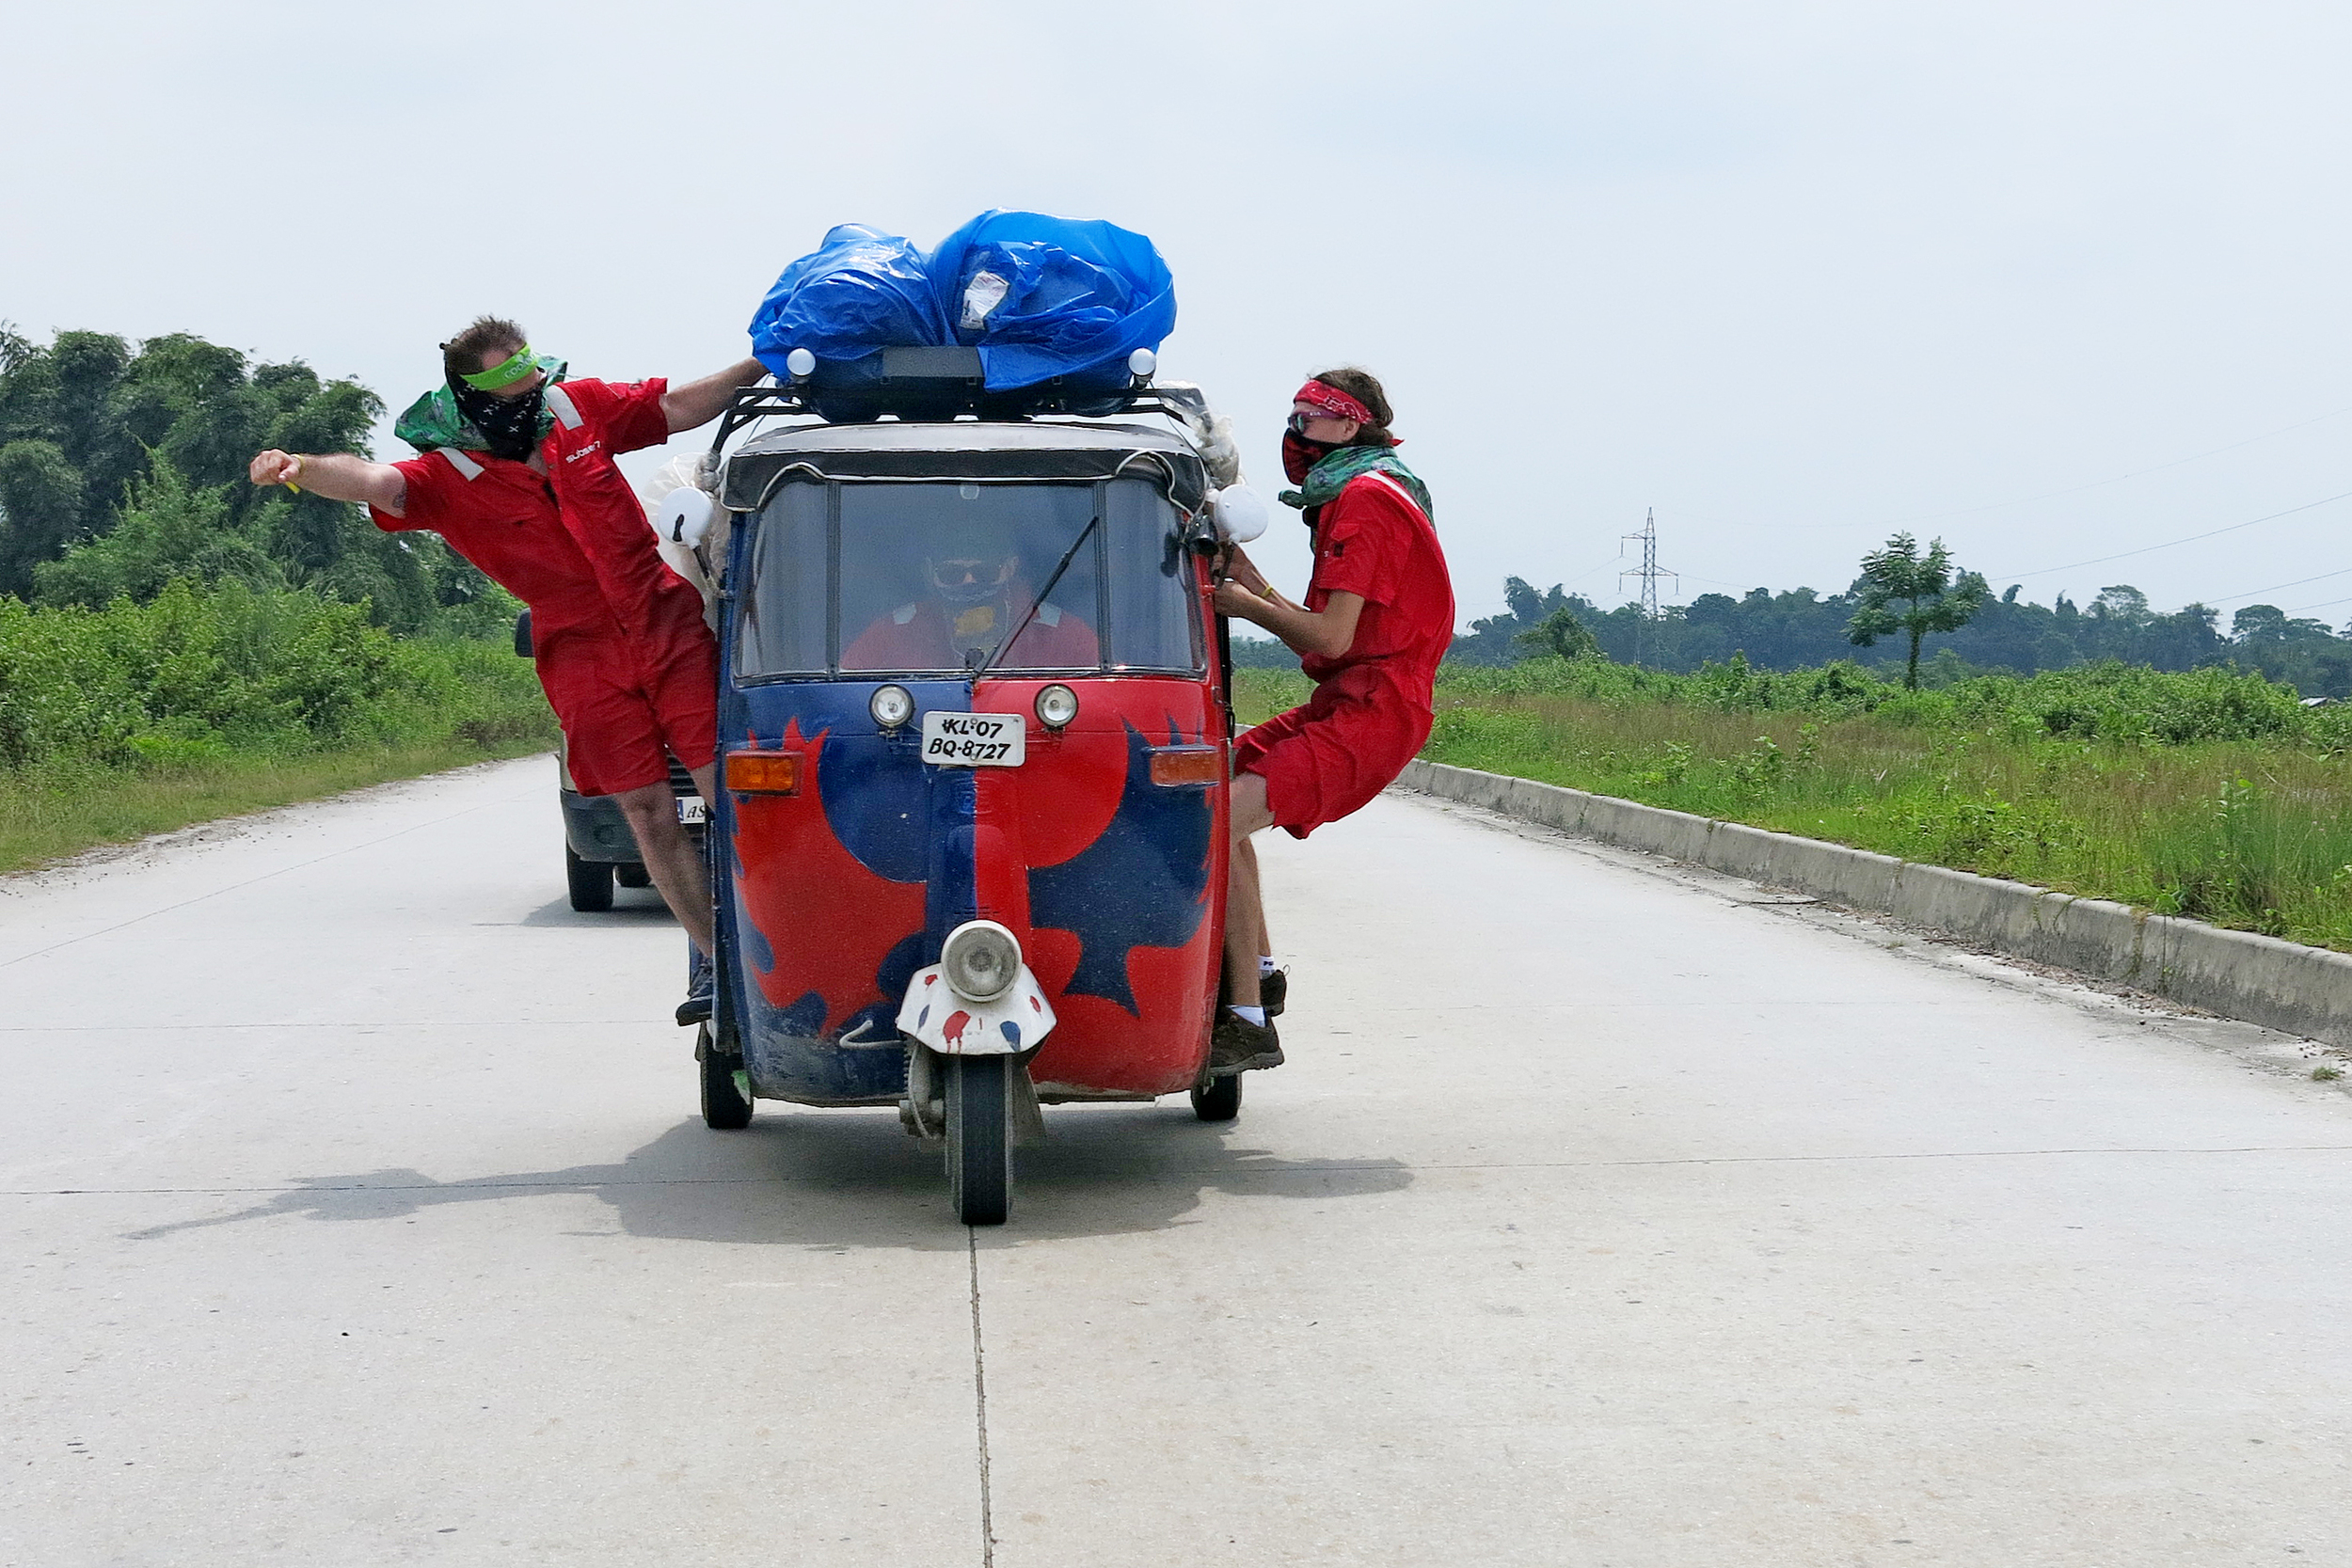 Two guys in masks hang out of a moving tuk tuk